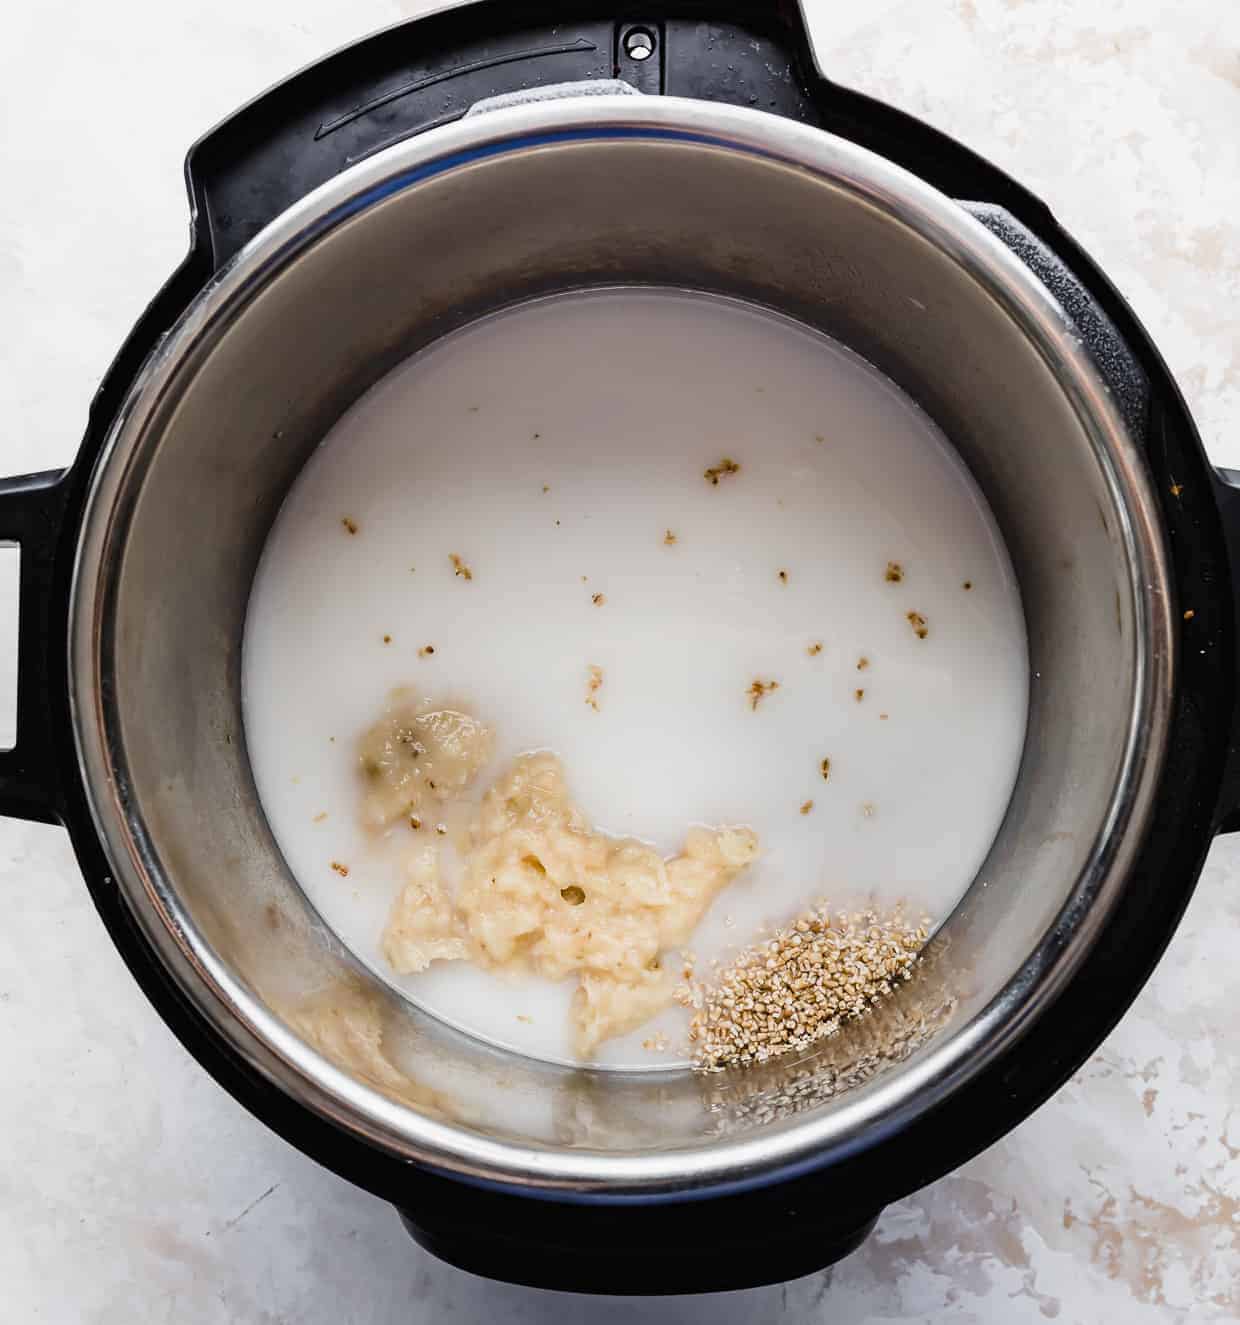 An instant pot full of almond milk, water, mashed bananas, and steel cut oats.